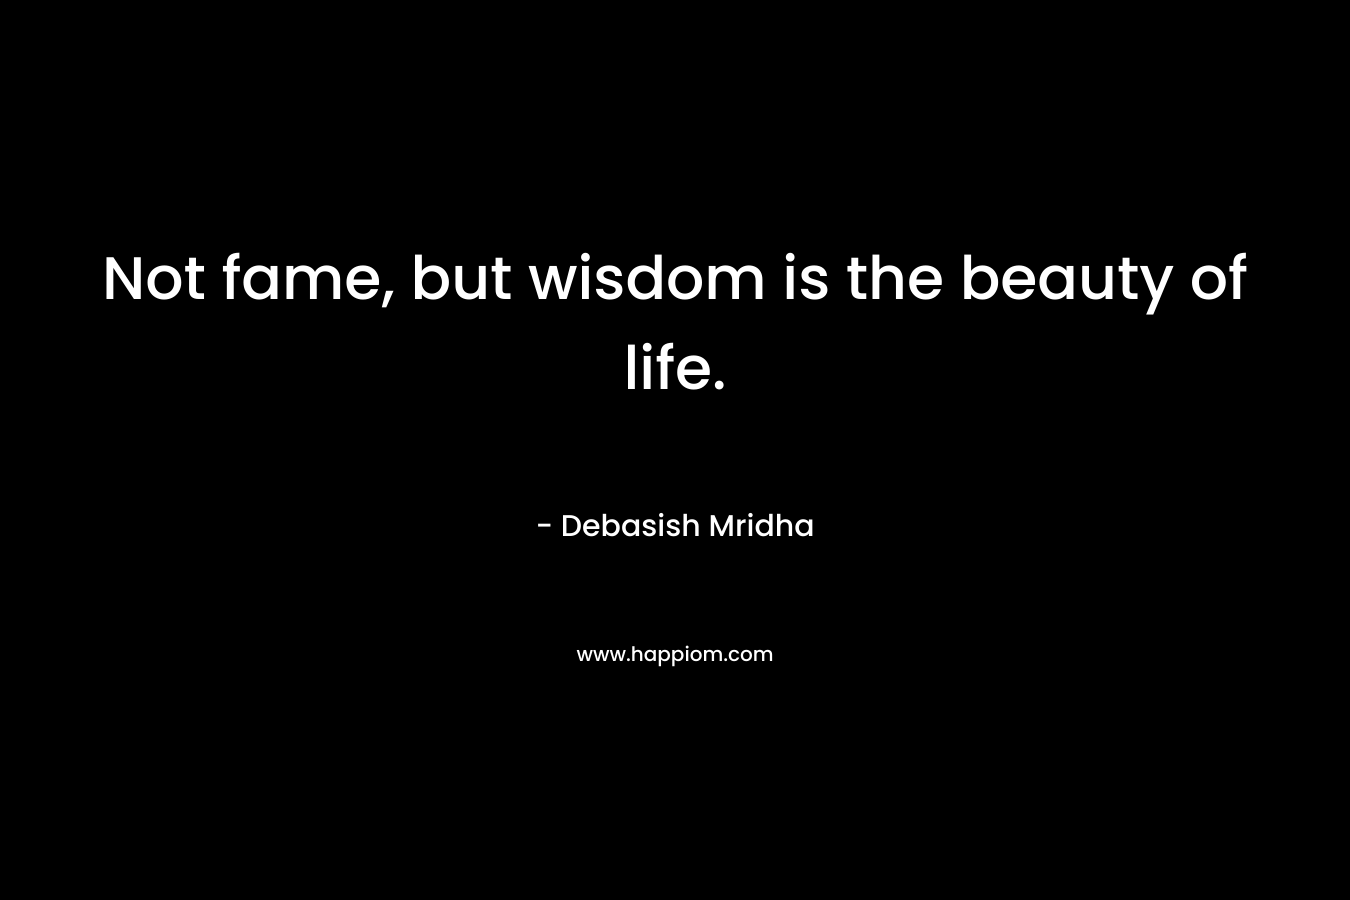 Not fame, but wisdom is the beauty of life. – Debasish Mridha